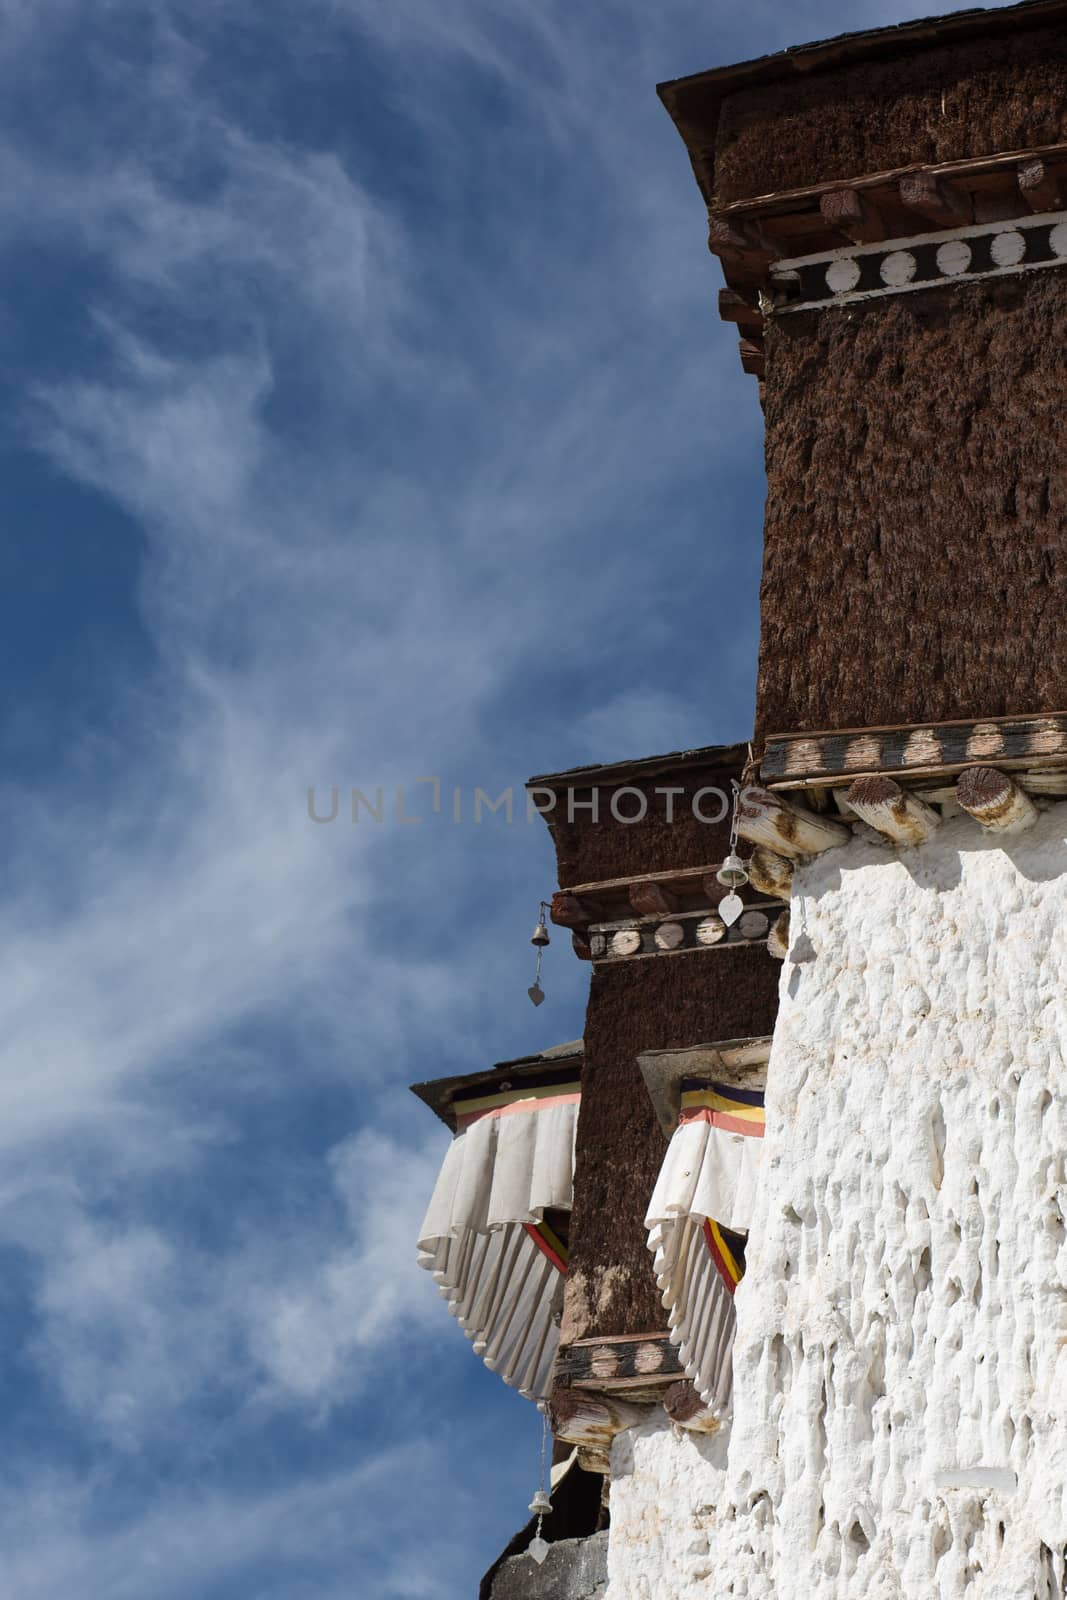 A view of the roof of the Palkhor Monastery in Tibet Province in China